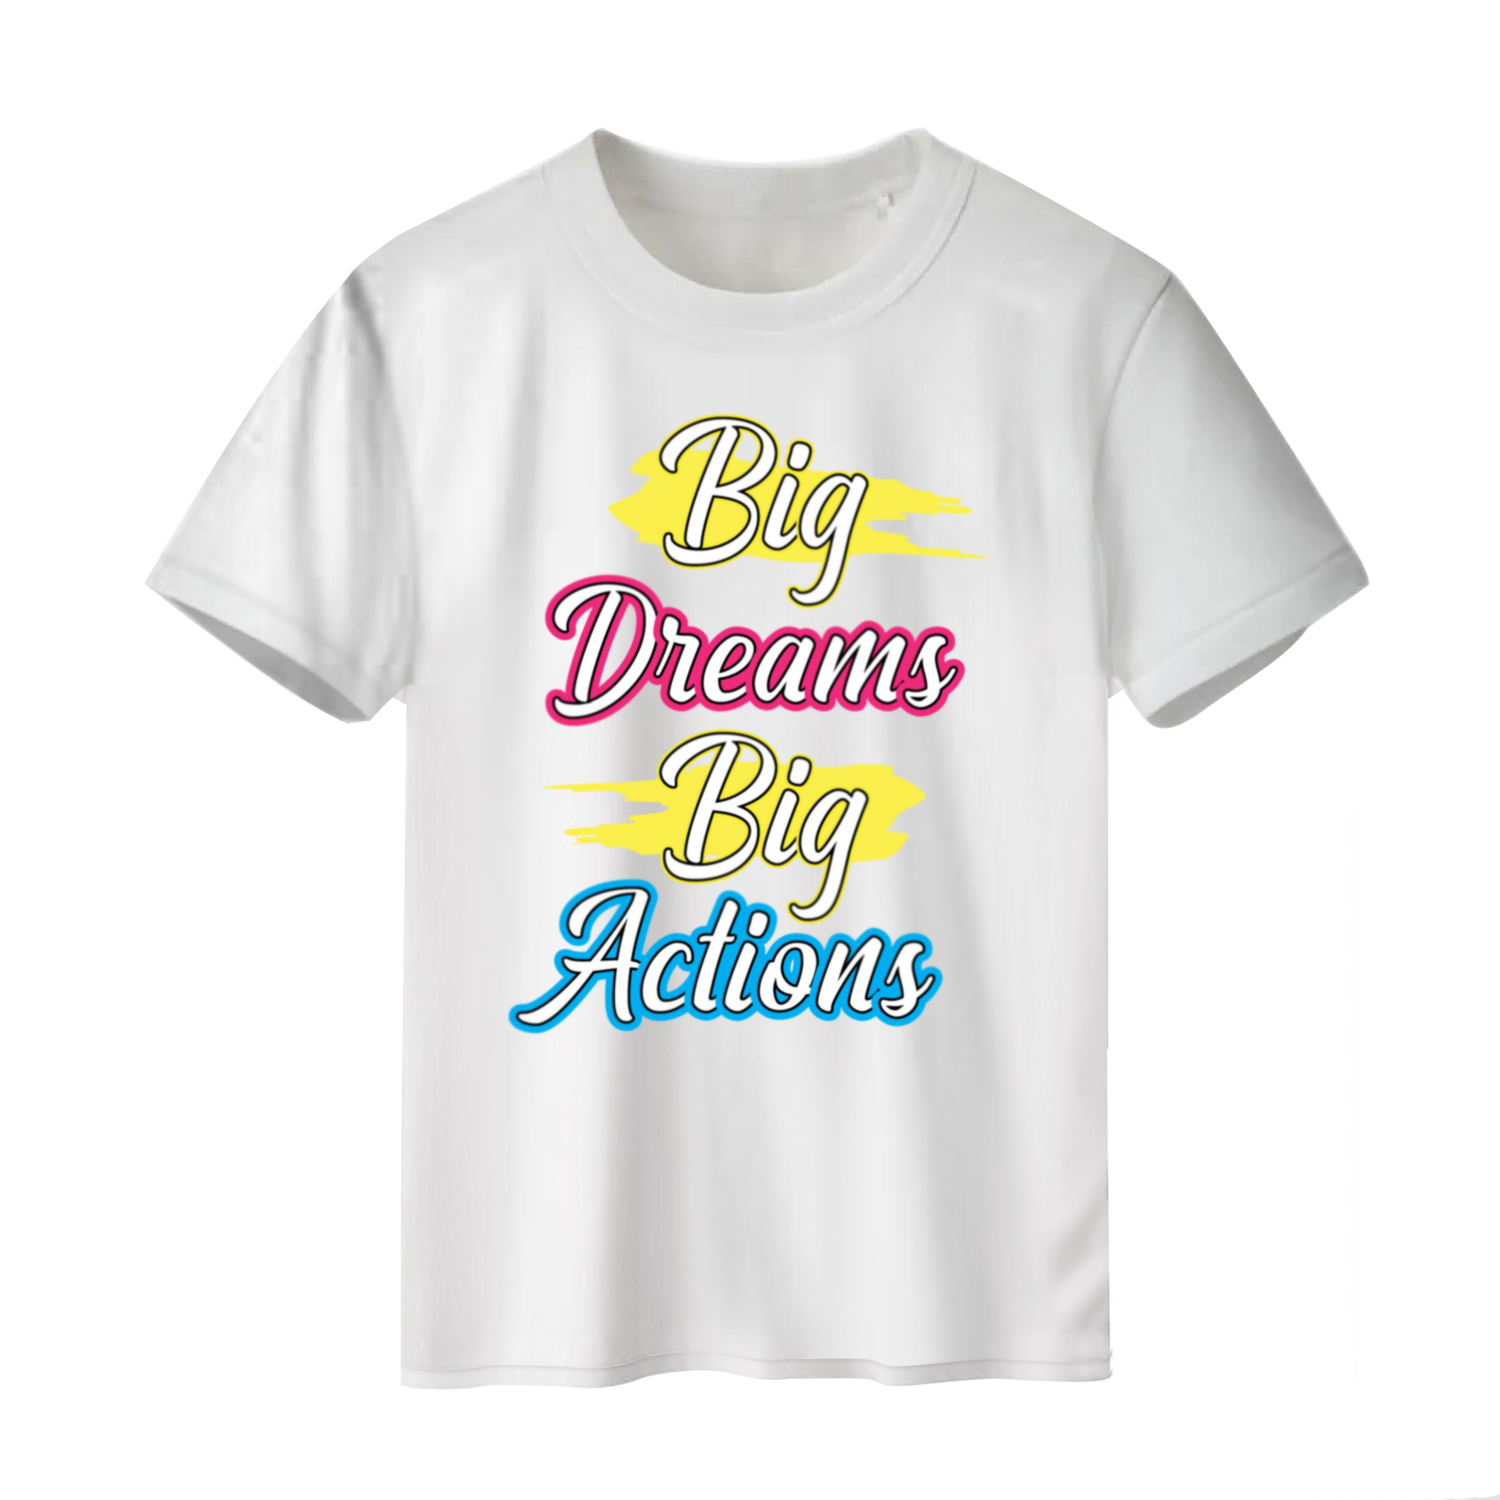 T-SHIRT WITH BEST QUALITY PRINTED GRAPHICS